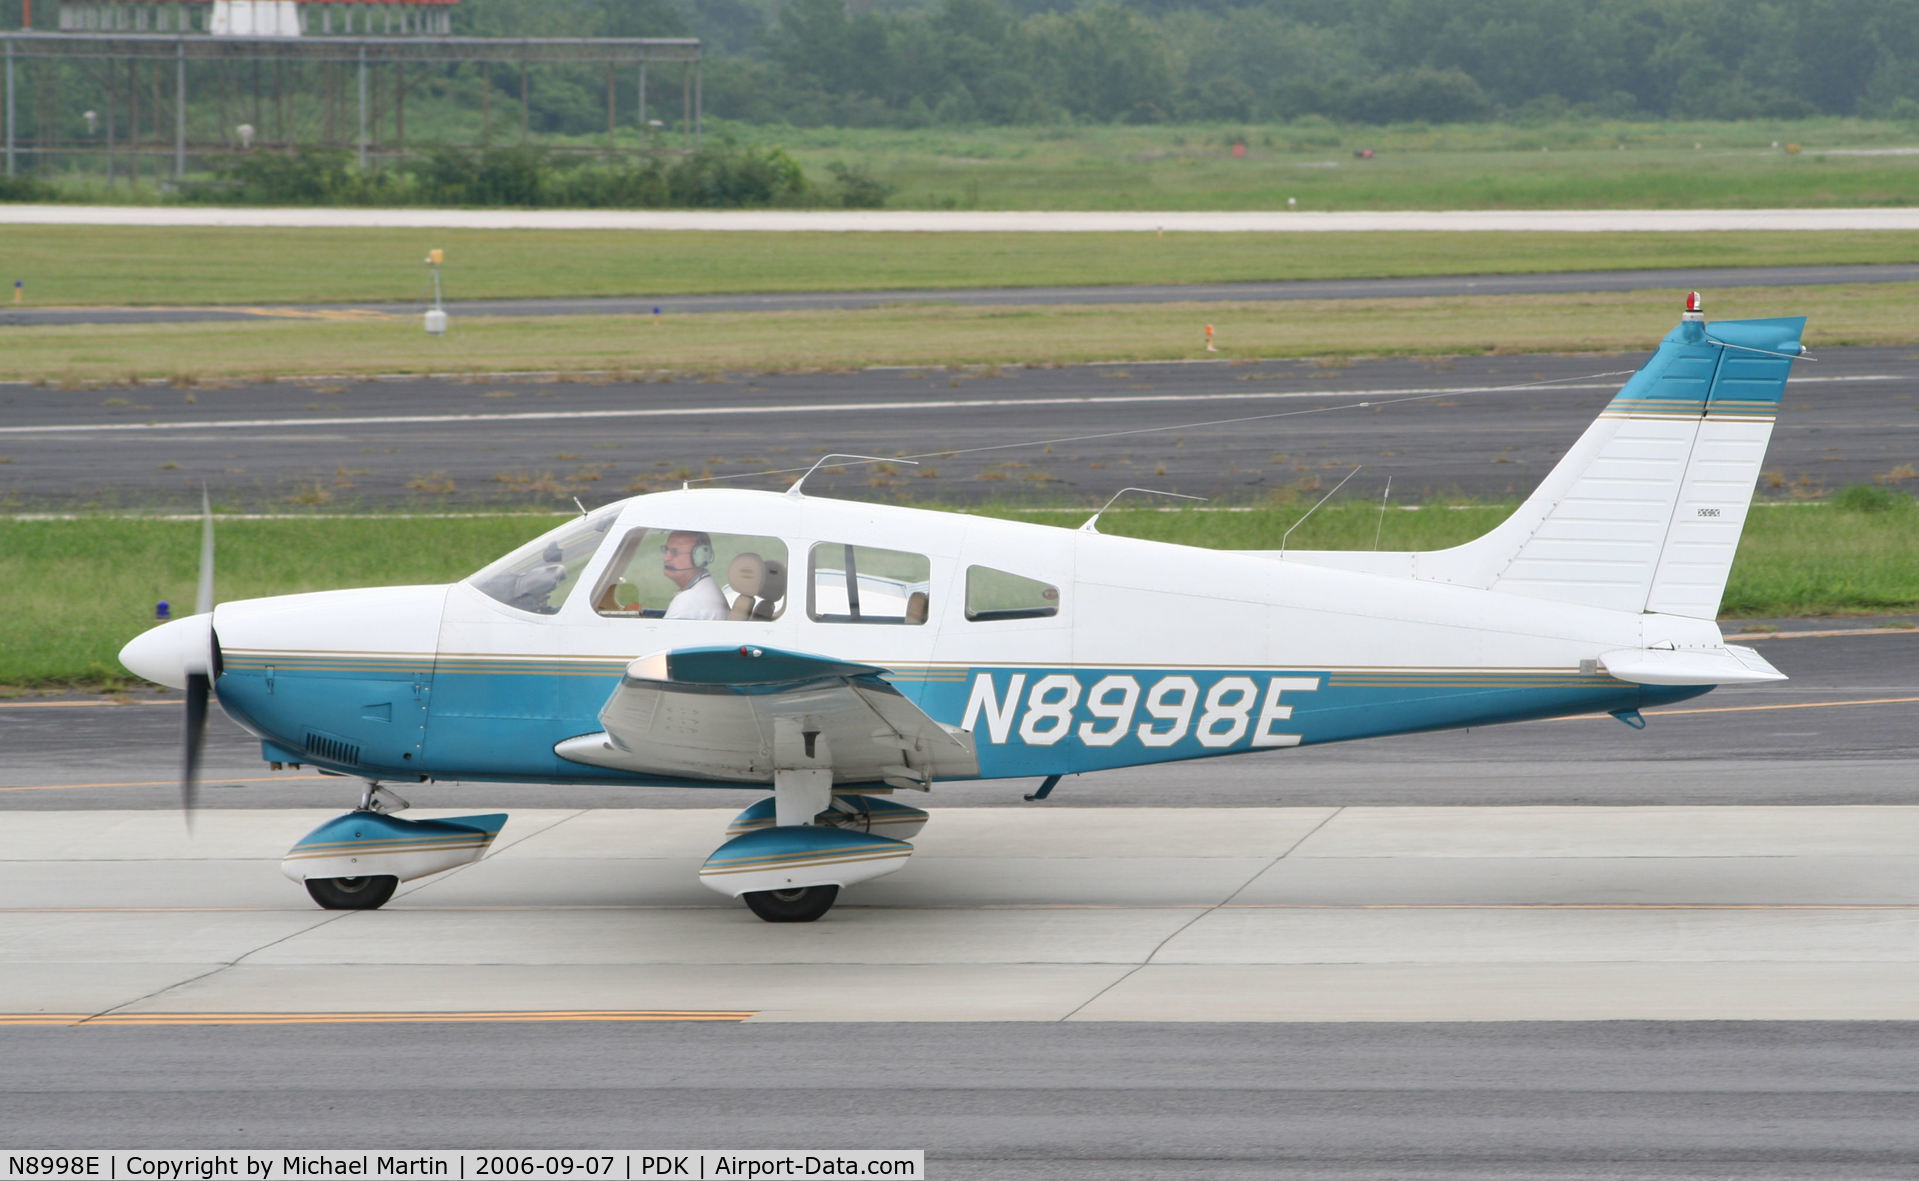 N8998E, 1976 Piper PA-28-181 C/N 28-7690219, Taxing to Epps Air Service